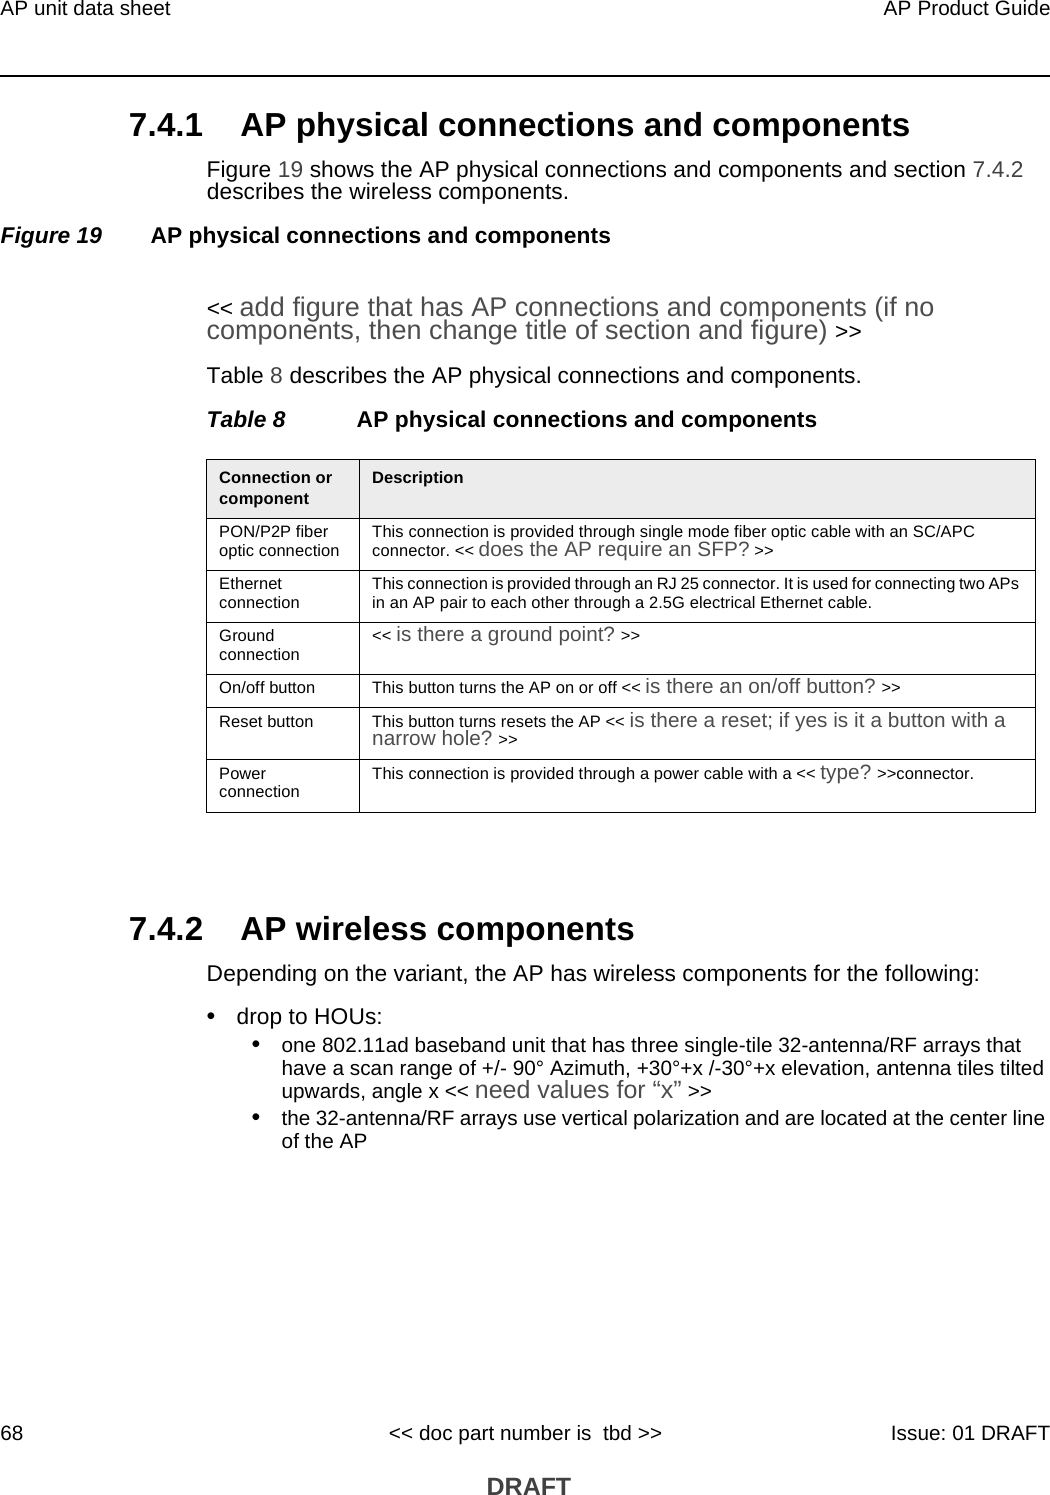 AP unit data sheet68AP Product Guide&lt;&lt; doc part number is  tbd &gt;&gt; Issue: 01 DRAFT DRAFT7.4.1 AP physical connections and componentsFigure 19 shows the AP physical connections and components and section 7.4.2 describes the wireless components.Figure 19 AP physical connections and components&lt;&lt; add figure that has AP connections and components (if no components, then change title of section and figure) &gt;&gt;Table 8 describes the AP physical connections and components.Table 8 AP physical connections and components7.4.2 AP wireless componentsDepending on the variant, the AP has wireless components for the following: •drop to HOUs:•one 802.11ad baseband unit that has three single-tile 32-antenna/RF arrays that have a scan range of +/- 90° Azimuth, +30°+x /-30°+x elevation, antenna tiles tilted upwards, angle x &lt;&lt; need values for “x” &gt;&gt;•the 32-antenna/RF arrays use vertical polarization and are located at the center line of the APConnection or component DescriptionPON/P2P fiber optic connection This connection is provided through single mode fiber optic cable with an SC/APC connector. &lt;&lt; does the AP require an SFP? &gt;&gt;Ethernet connection This connection is provided through an RJ 25 connector. It is used for connecting two APs in an AP pair to each other through a 2.5G electrical Ethernet cable.Ground connection &lt;&lt; is there a ground point? &gt;&gt; On/off button This button turns the AP on or off &lt;&lt; is there an on/off button? &gt;&gt; Reset button This button turns resets the AP &lt;&lt; is there a reset; if yes is it a button with a narrow hole? &gt;&gt; Power connection This connection is provided through a power cable with a &lt;&lt; type? &gt;&gt;connector.